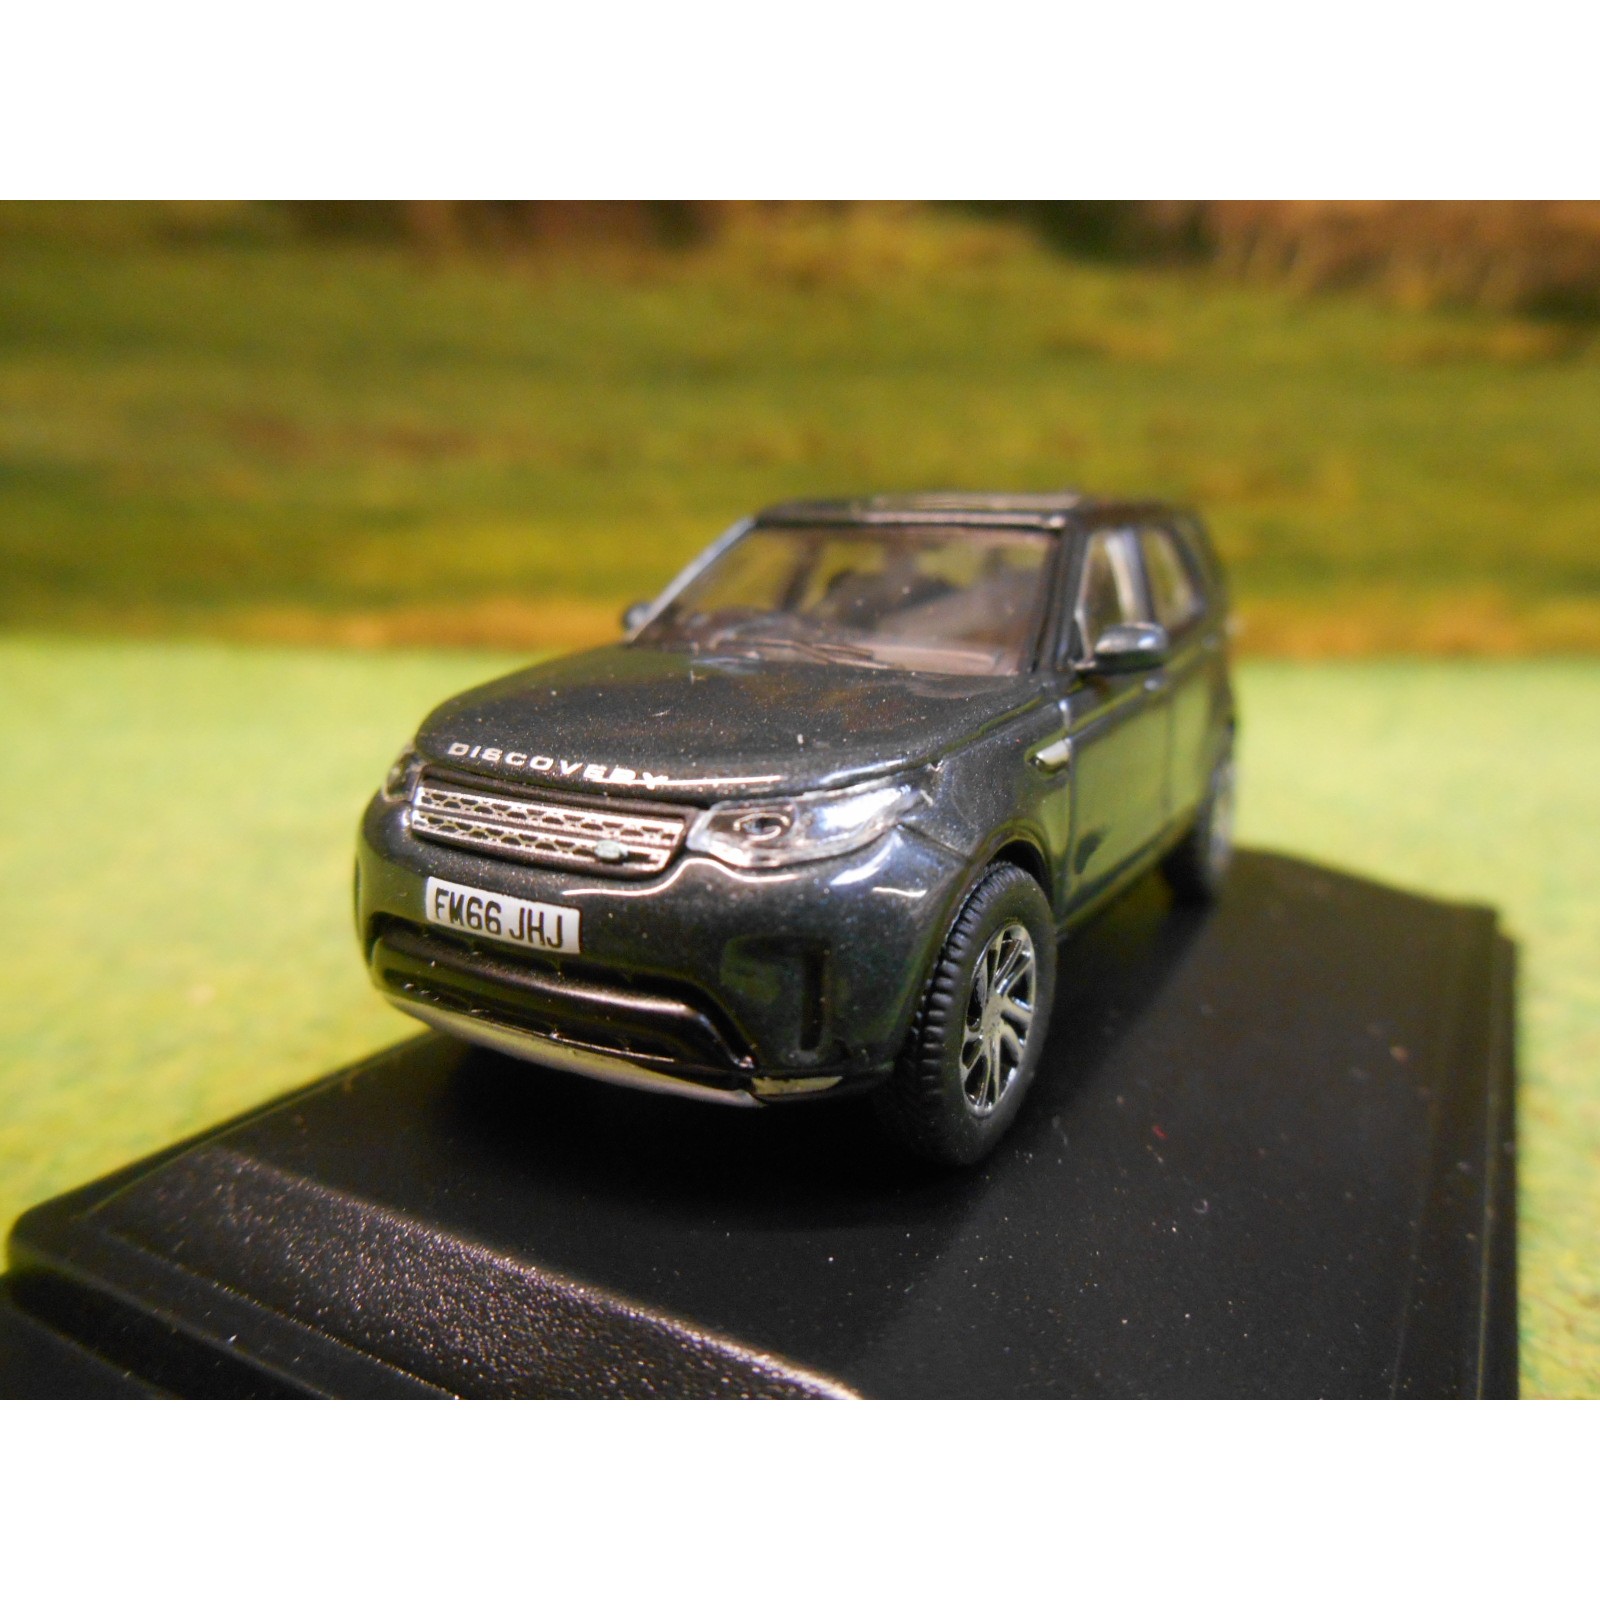 76DIS5002 Oxford Diecast Land Rover Discovery 5 HSE LUX Santorini Black 